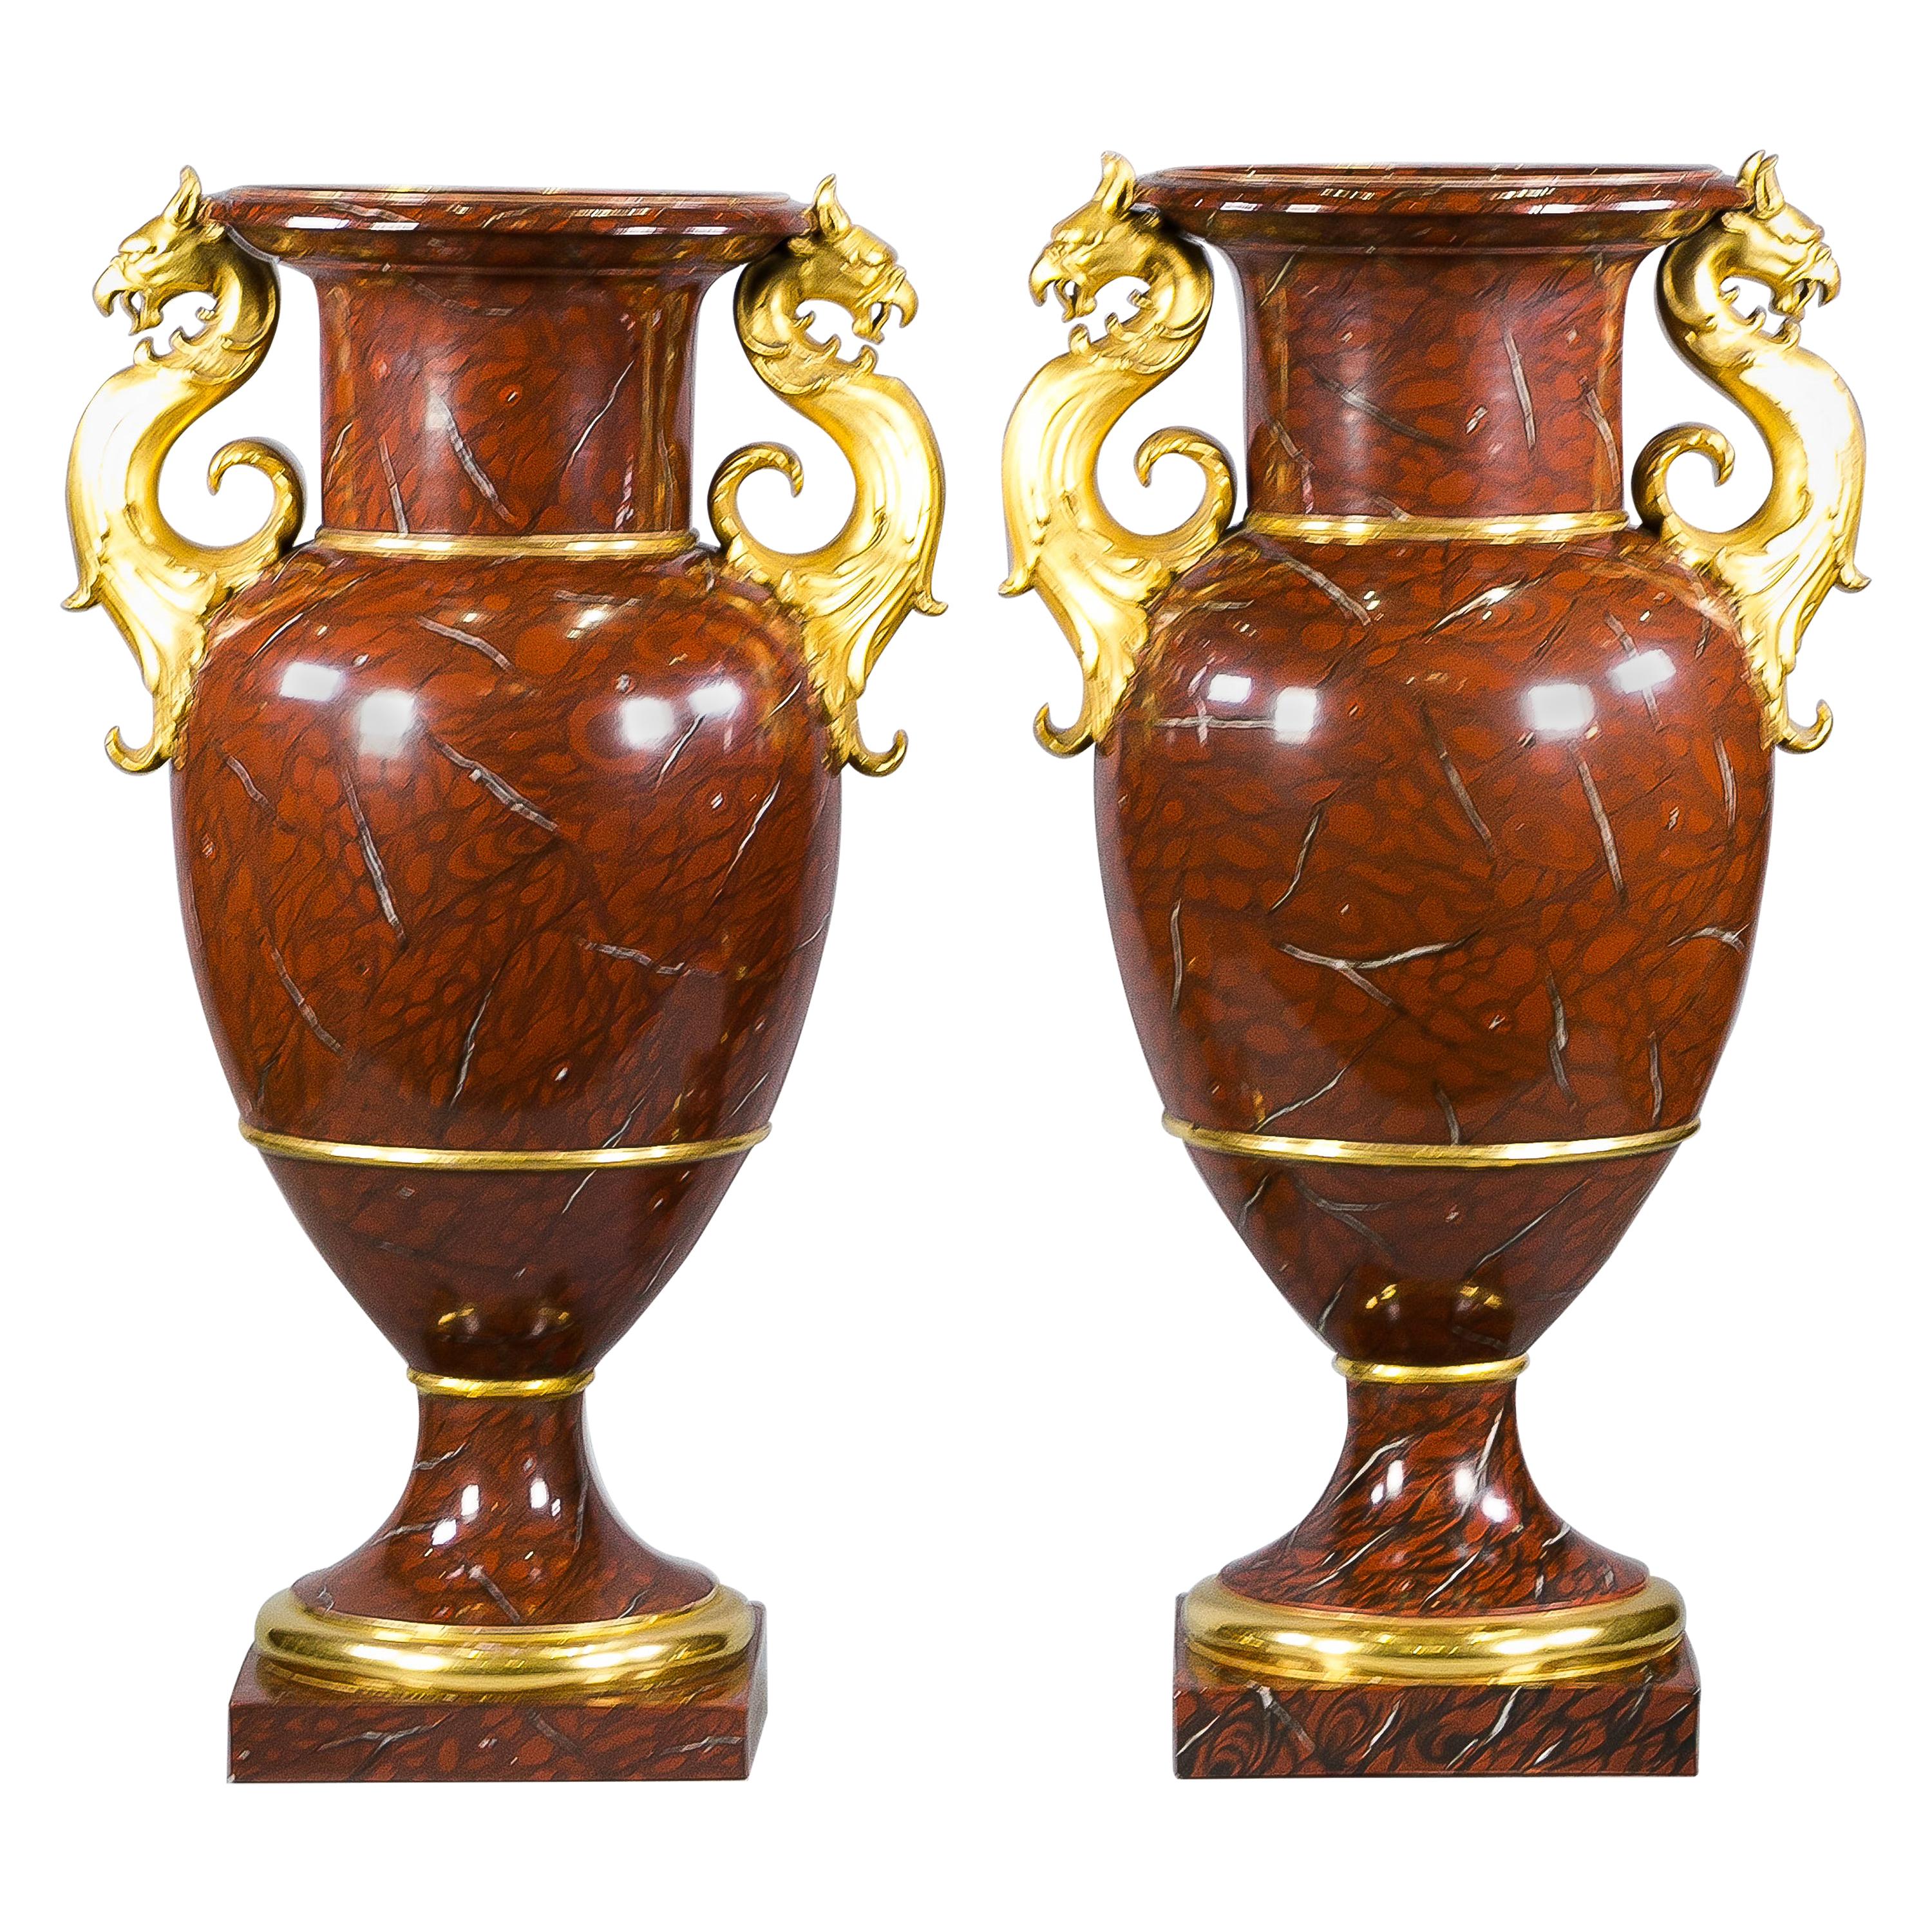 Pair of Berlin Porcelain Faux Marble and Gilt Urns, circa 1825